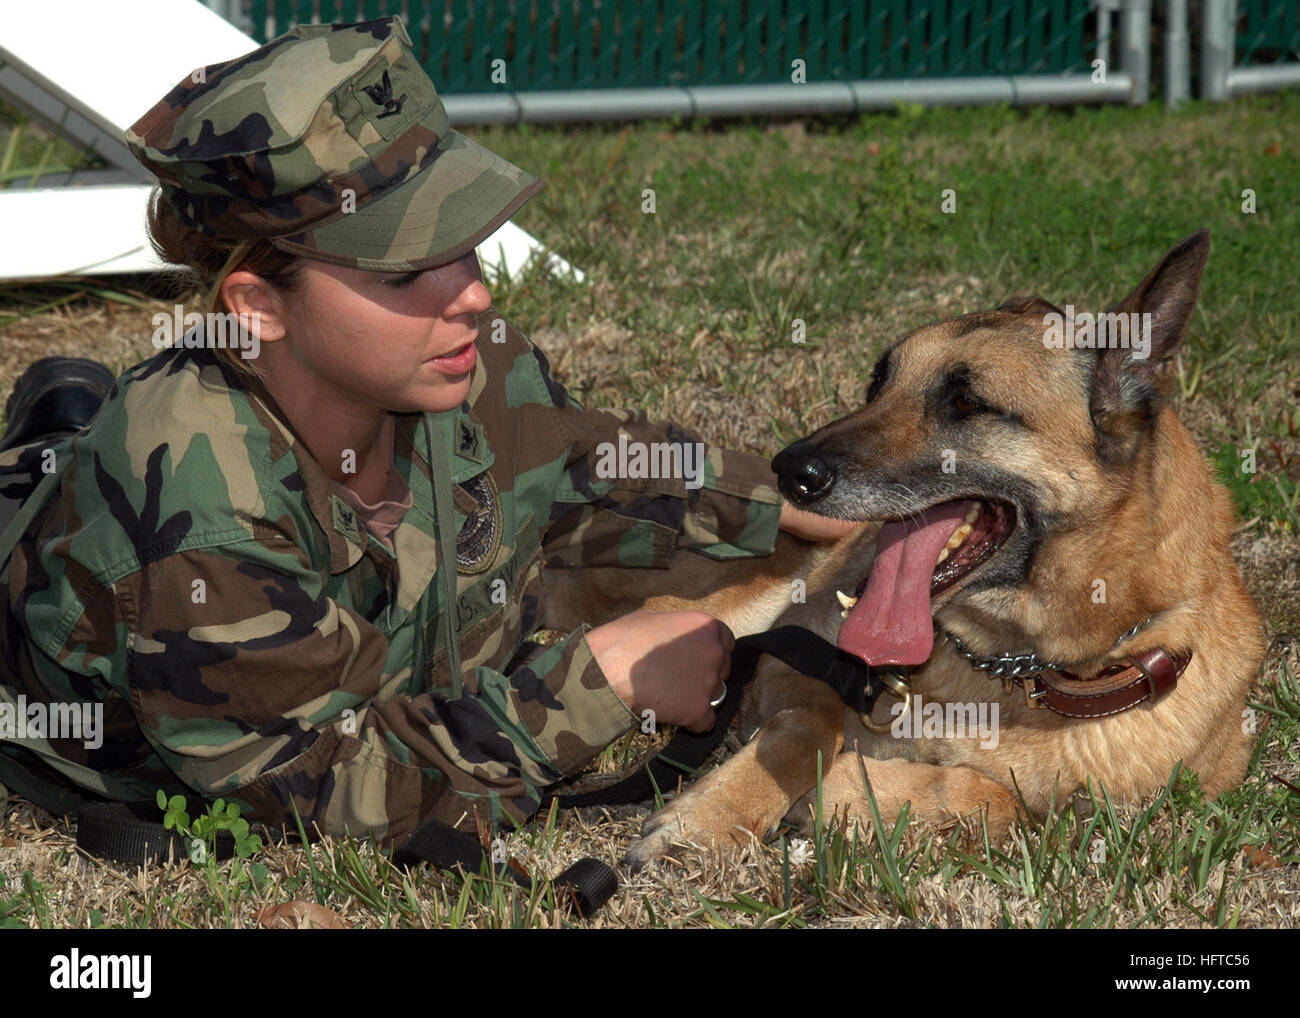 061219-N-1522S-039  Mayport, Fla. (Dec. 19,2006) Ð Master-at-Arms 3rd Class Leslie Orand gives positive reinforcement to Amber, an explosive detector dog, after completing her obstacle training course. Orand and Amber are assigned to the Security Military Working Dog Unit aboard Naval Station Mayport. U.S. Navy photo by Mass Communication Specialist 2nd Class Leah Stiles (RELEASED) US Navy 061219-N-1522S-039 Master-at-Arms 3rd Class Leslie Orand gives positive reinforcement to Amber, an explosive detector dog, after completing her obstacle training course Stock Photo